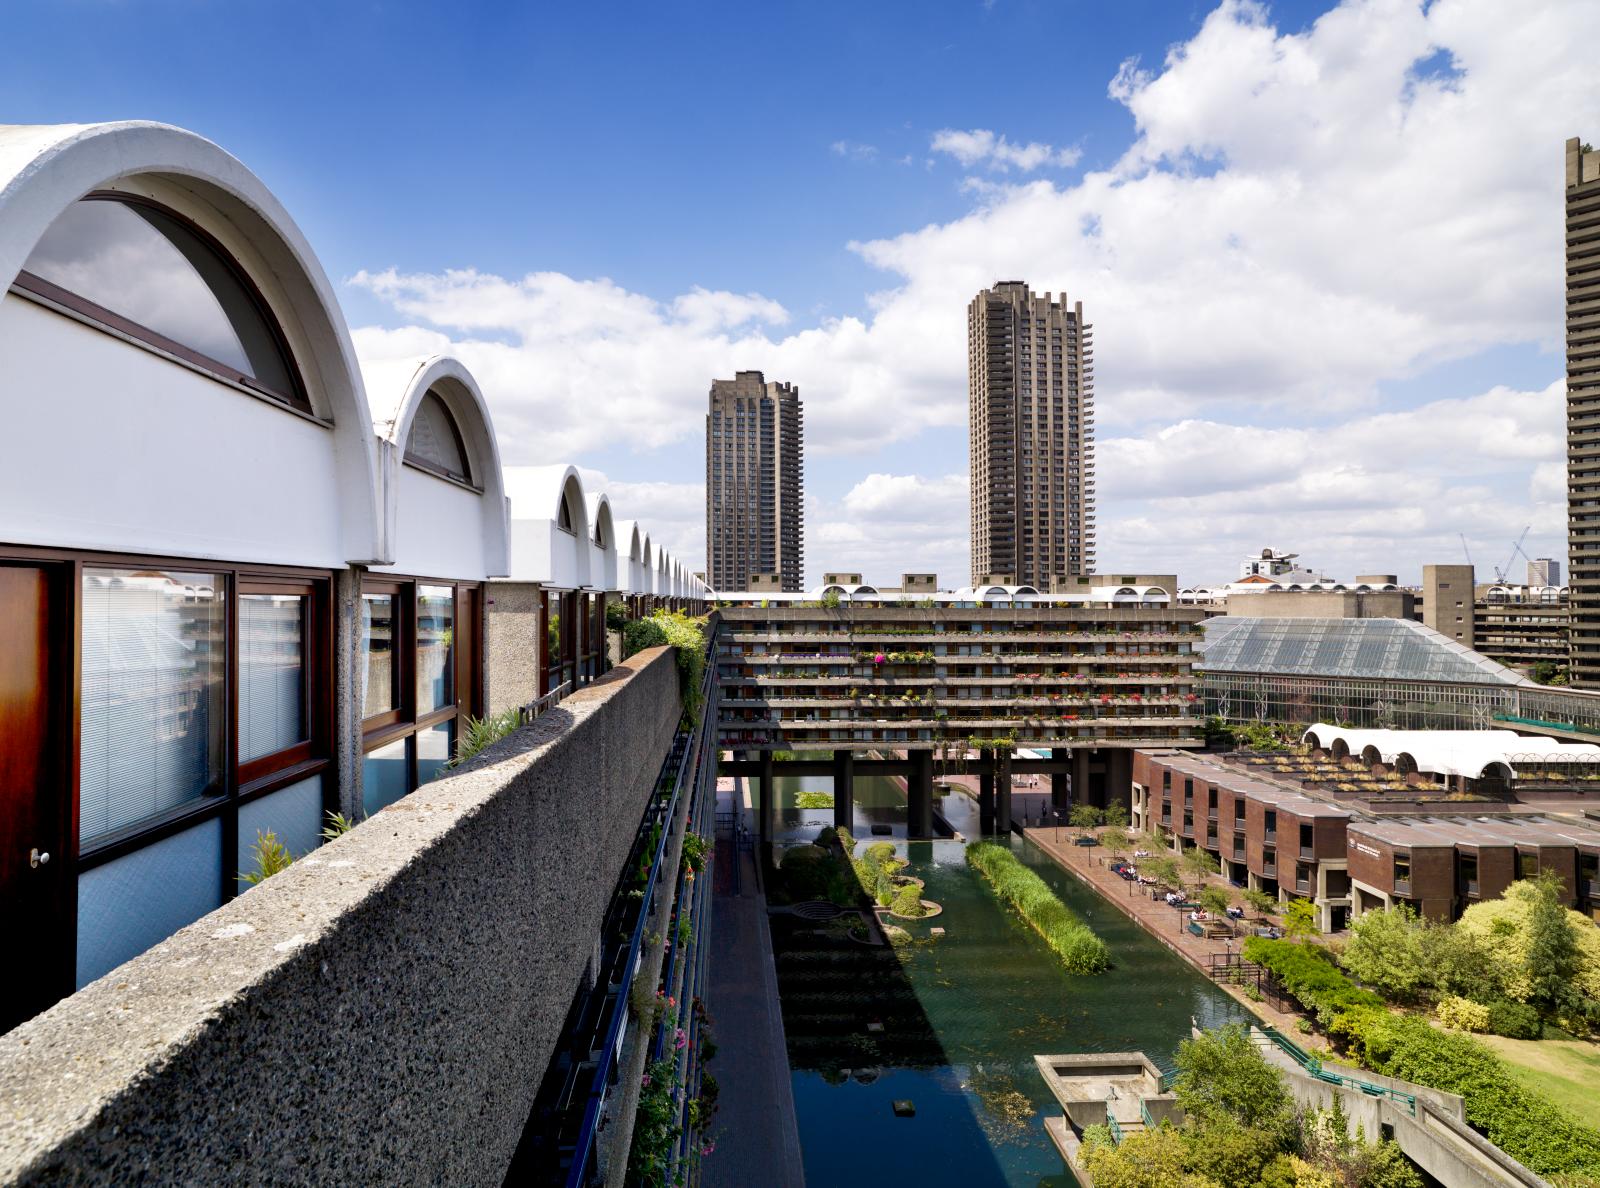 The Barbican, City of London. General view of exterior.